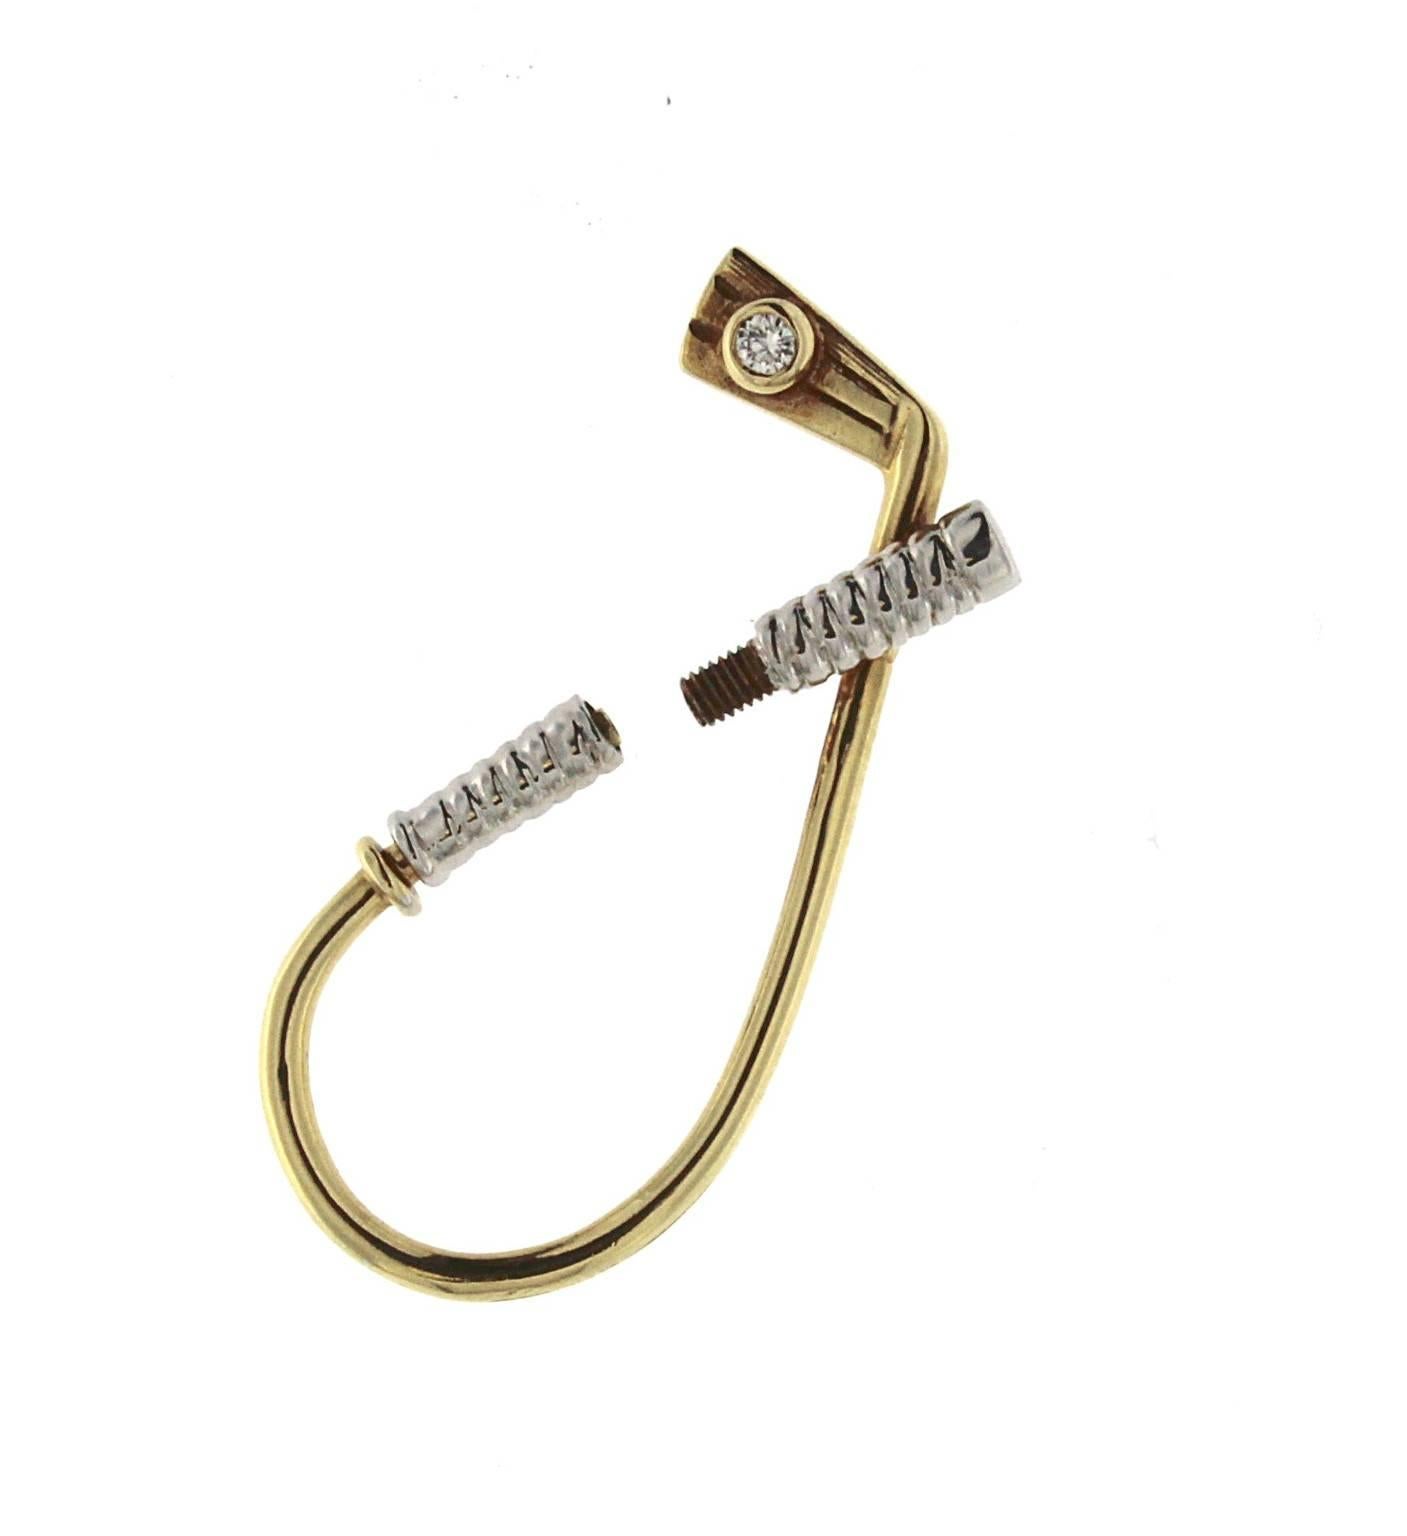 Classic and essential golf stick turned to form an elegant keyring in 18 kt gold
The main part is in yellow god while the handle is in white gold
Total 18 kt gold weight: gr 8.00
White diamonds ct 0.07
Stamp: 750, 10 MI
